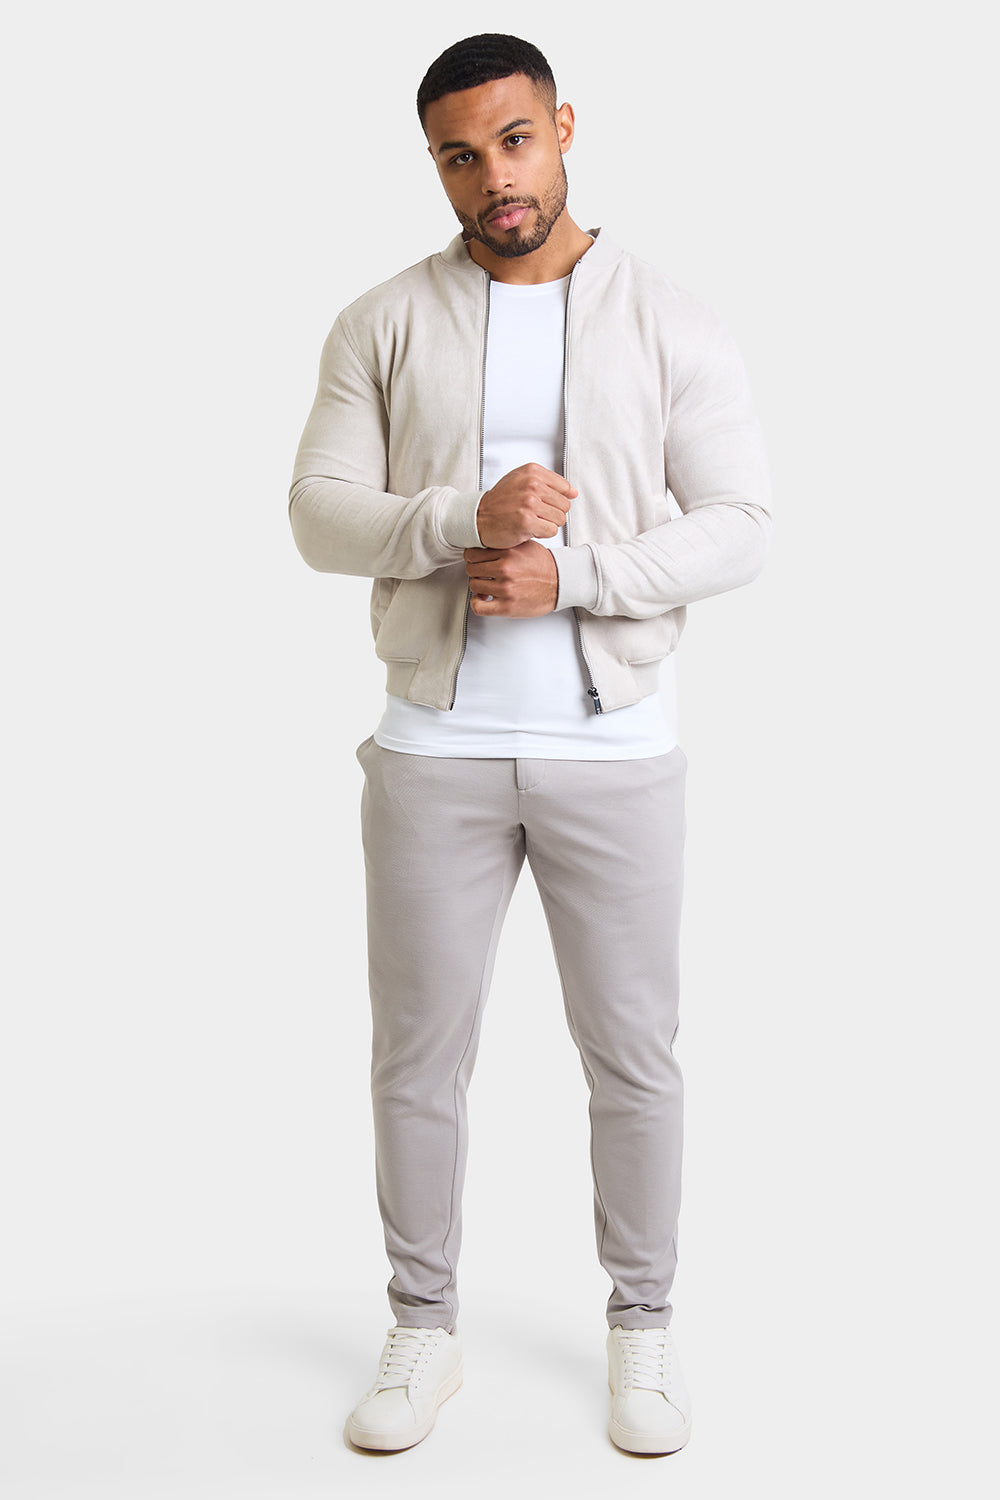 Suede Look Bomber Jacket in Stone - TAILORED ATHLETE - ROW